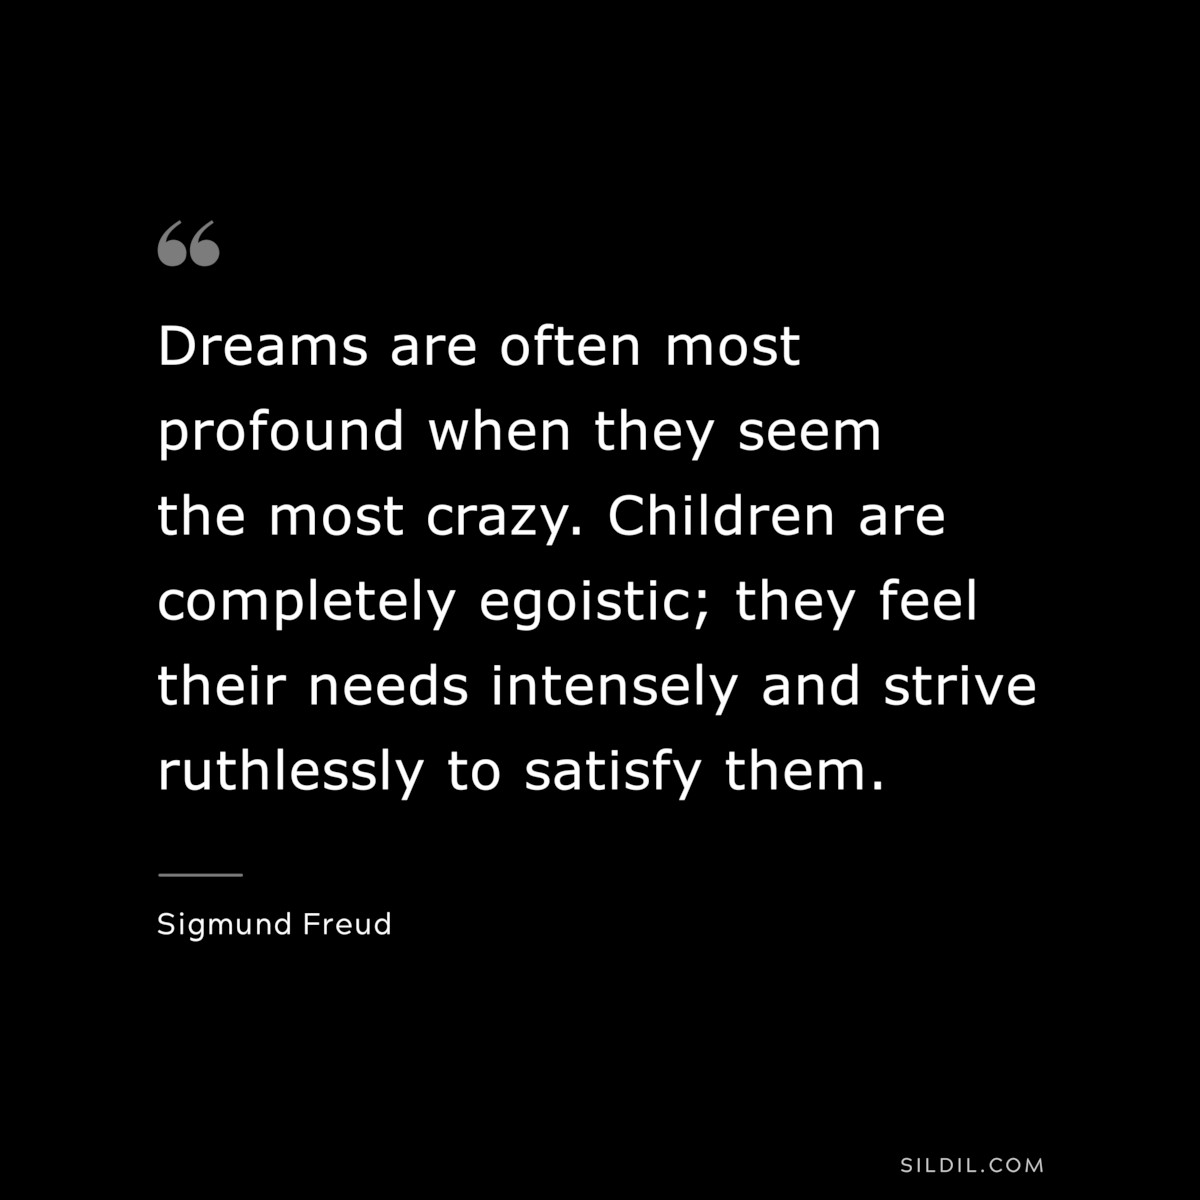 Dreams are often most profound when they seem the most crazy. Children are completely egoistic; they feel their needs intensely and strive ruthlessly to satisfy them. ― Sigmund Frued